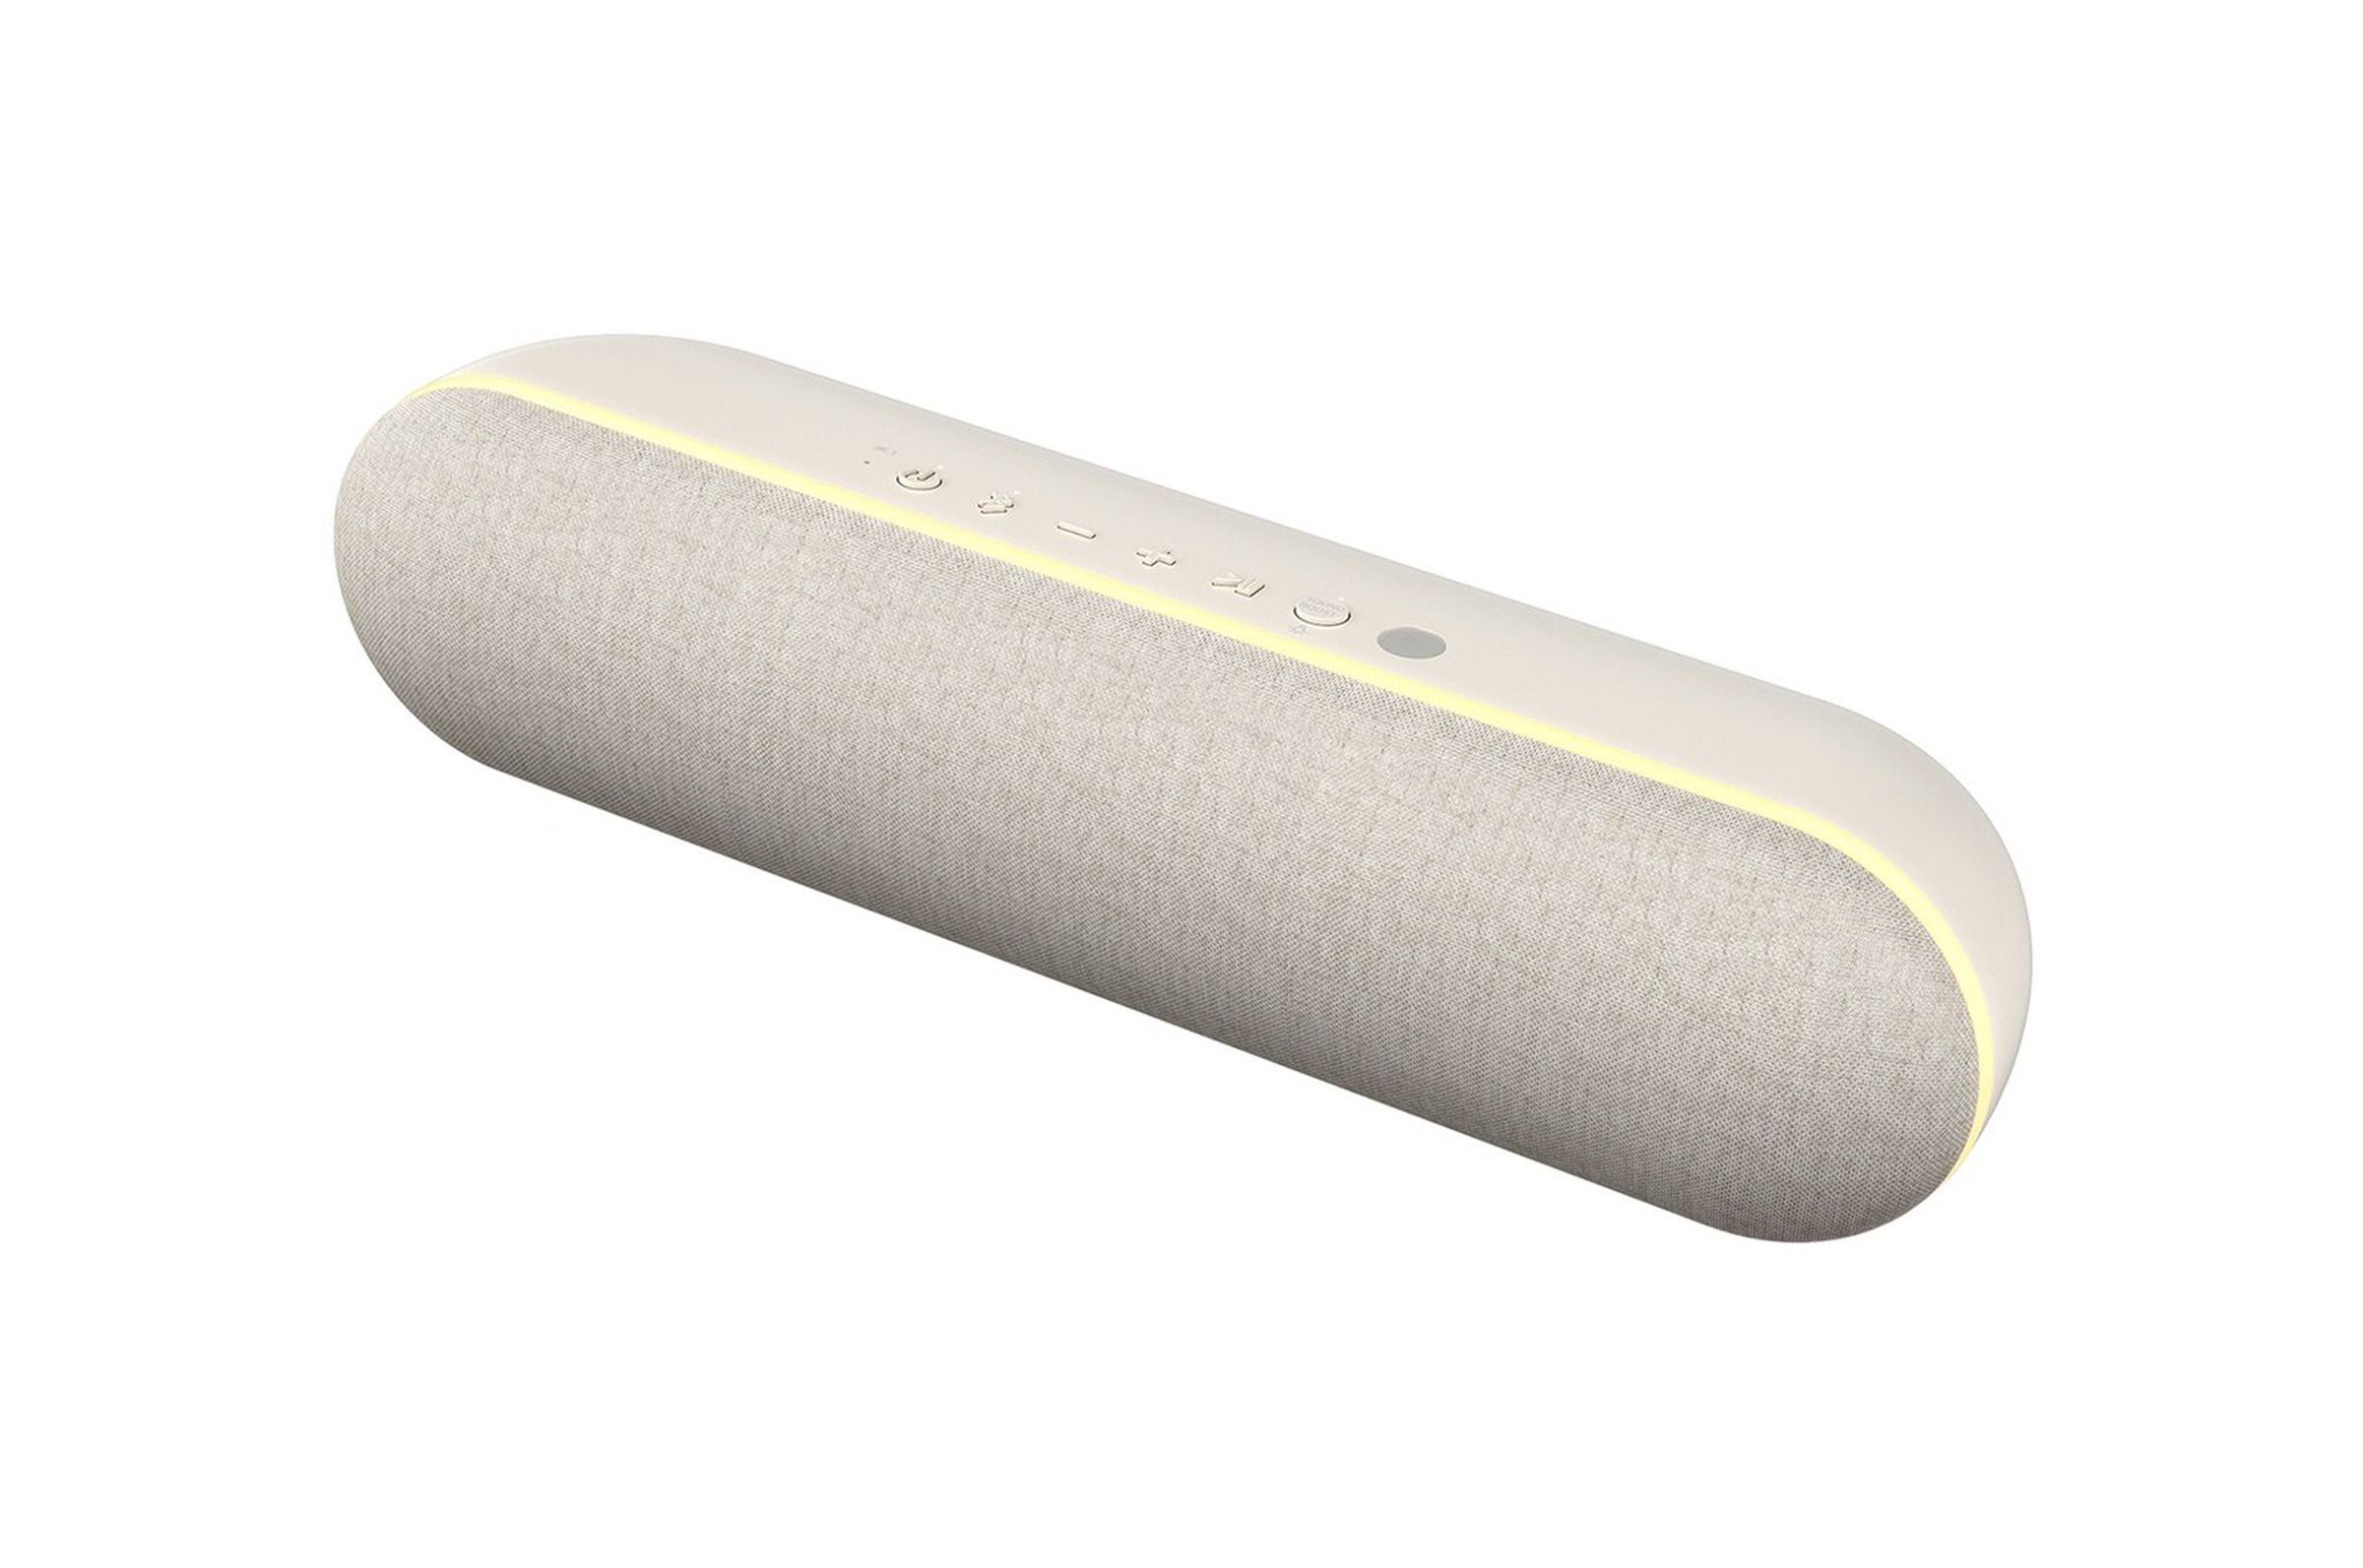 The LG StanbyME Speaker XT7S against a white background.